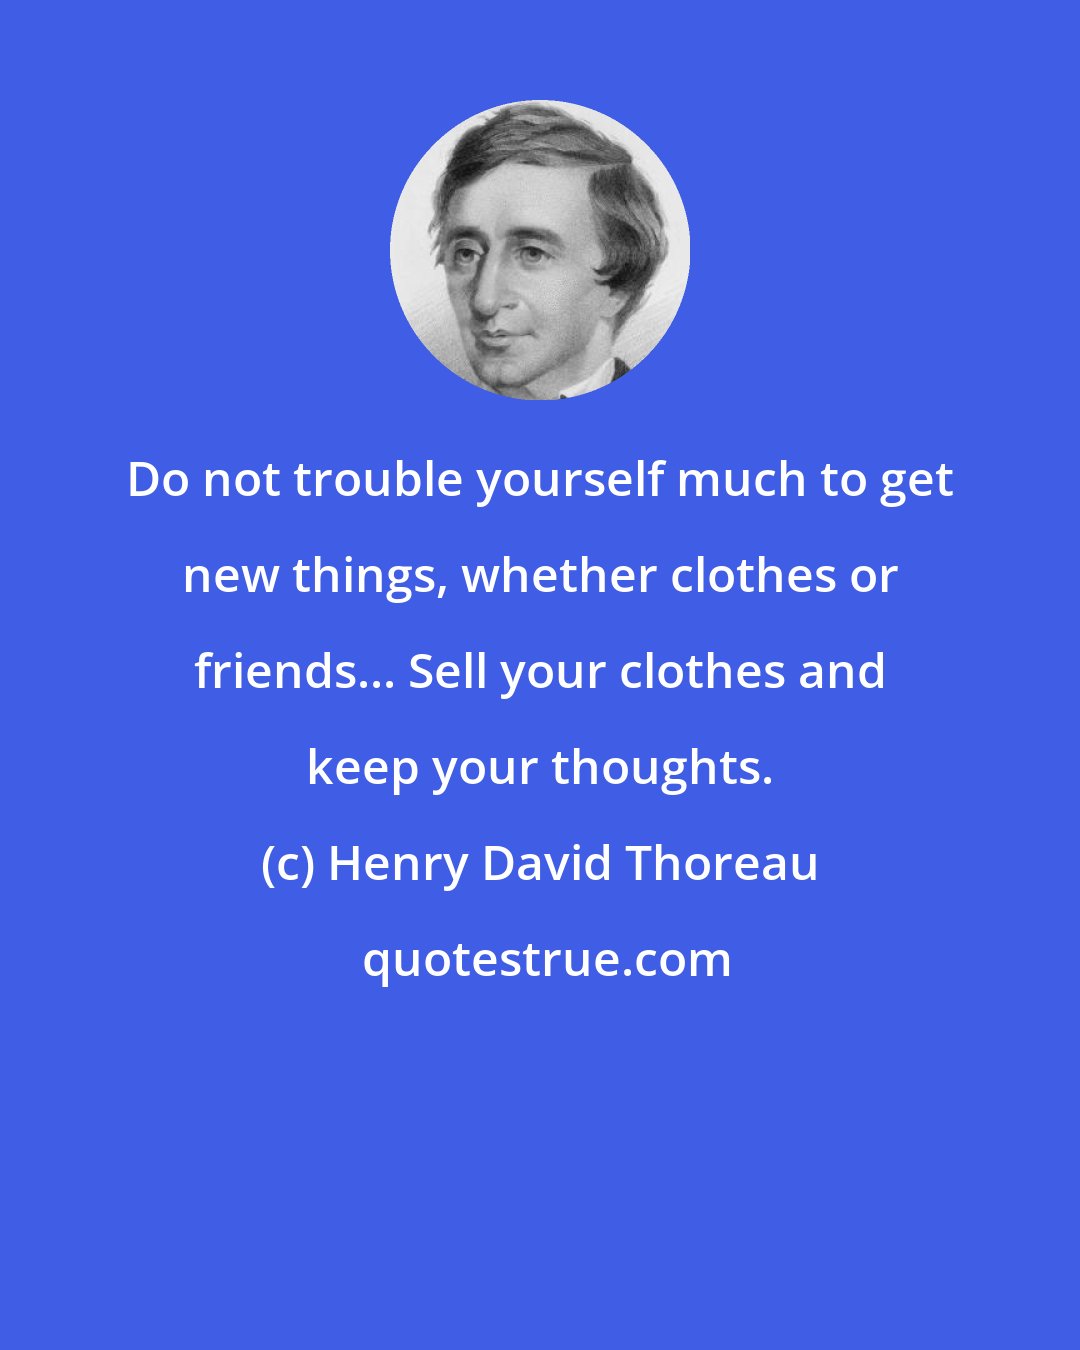 Henry David Thoreau: Do not trouble yourself much to get new things, whether clothes or friends... Sell your clothes and keep your thoughts.